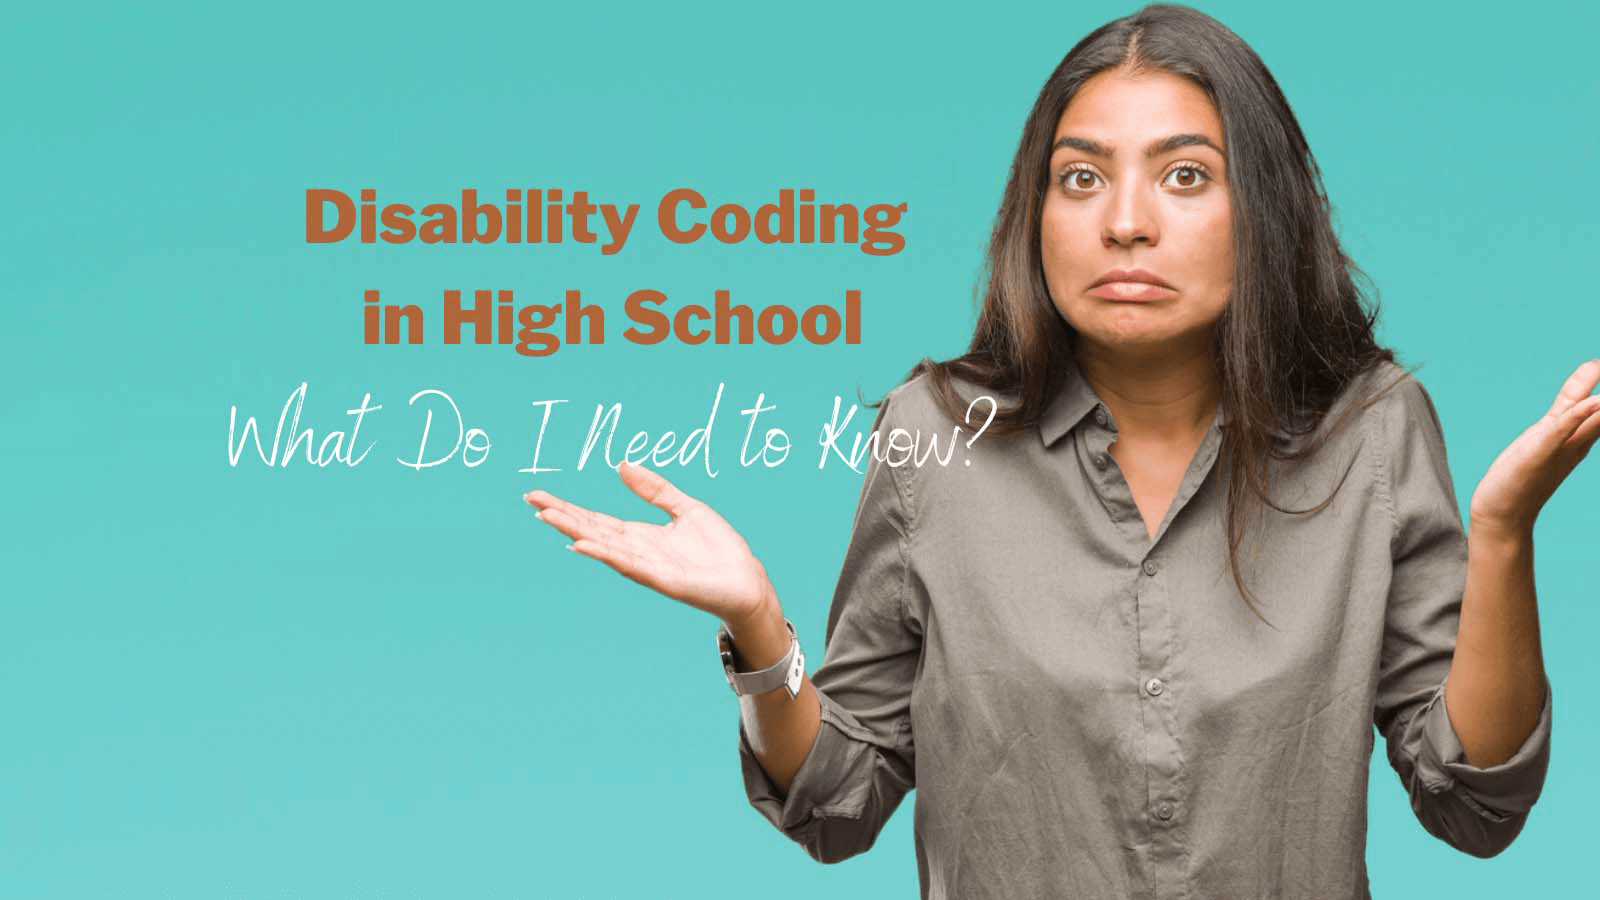 East Indian Mom with long dark hair, a confused look on her face, shrugging her shoulders with her hands in the air. The title is Disability Coding in High School: What do I need to know?